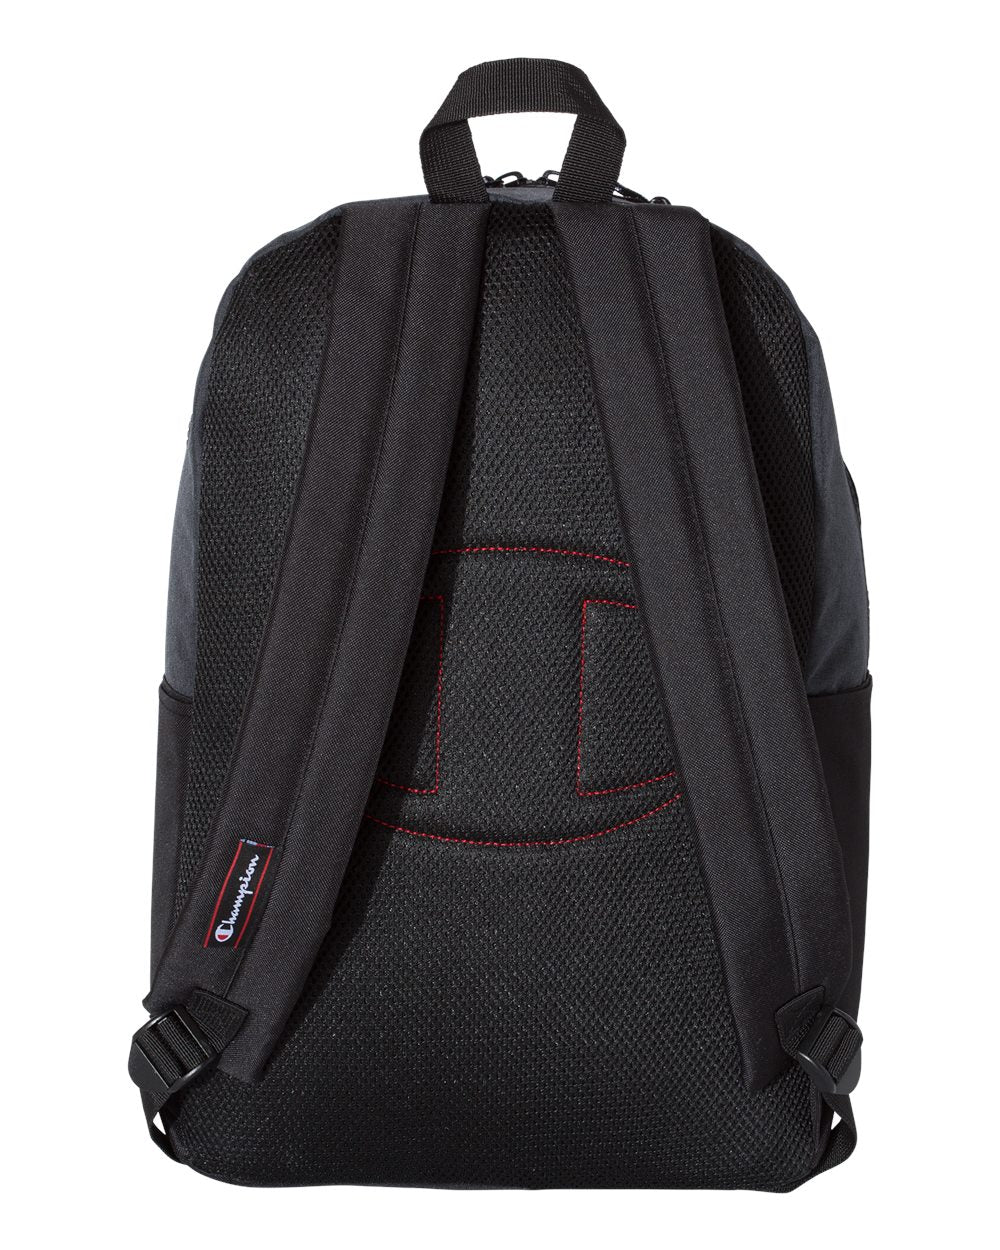 Nickel and Dime skate shop x Champion Back pack